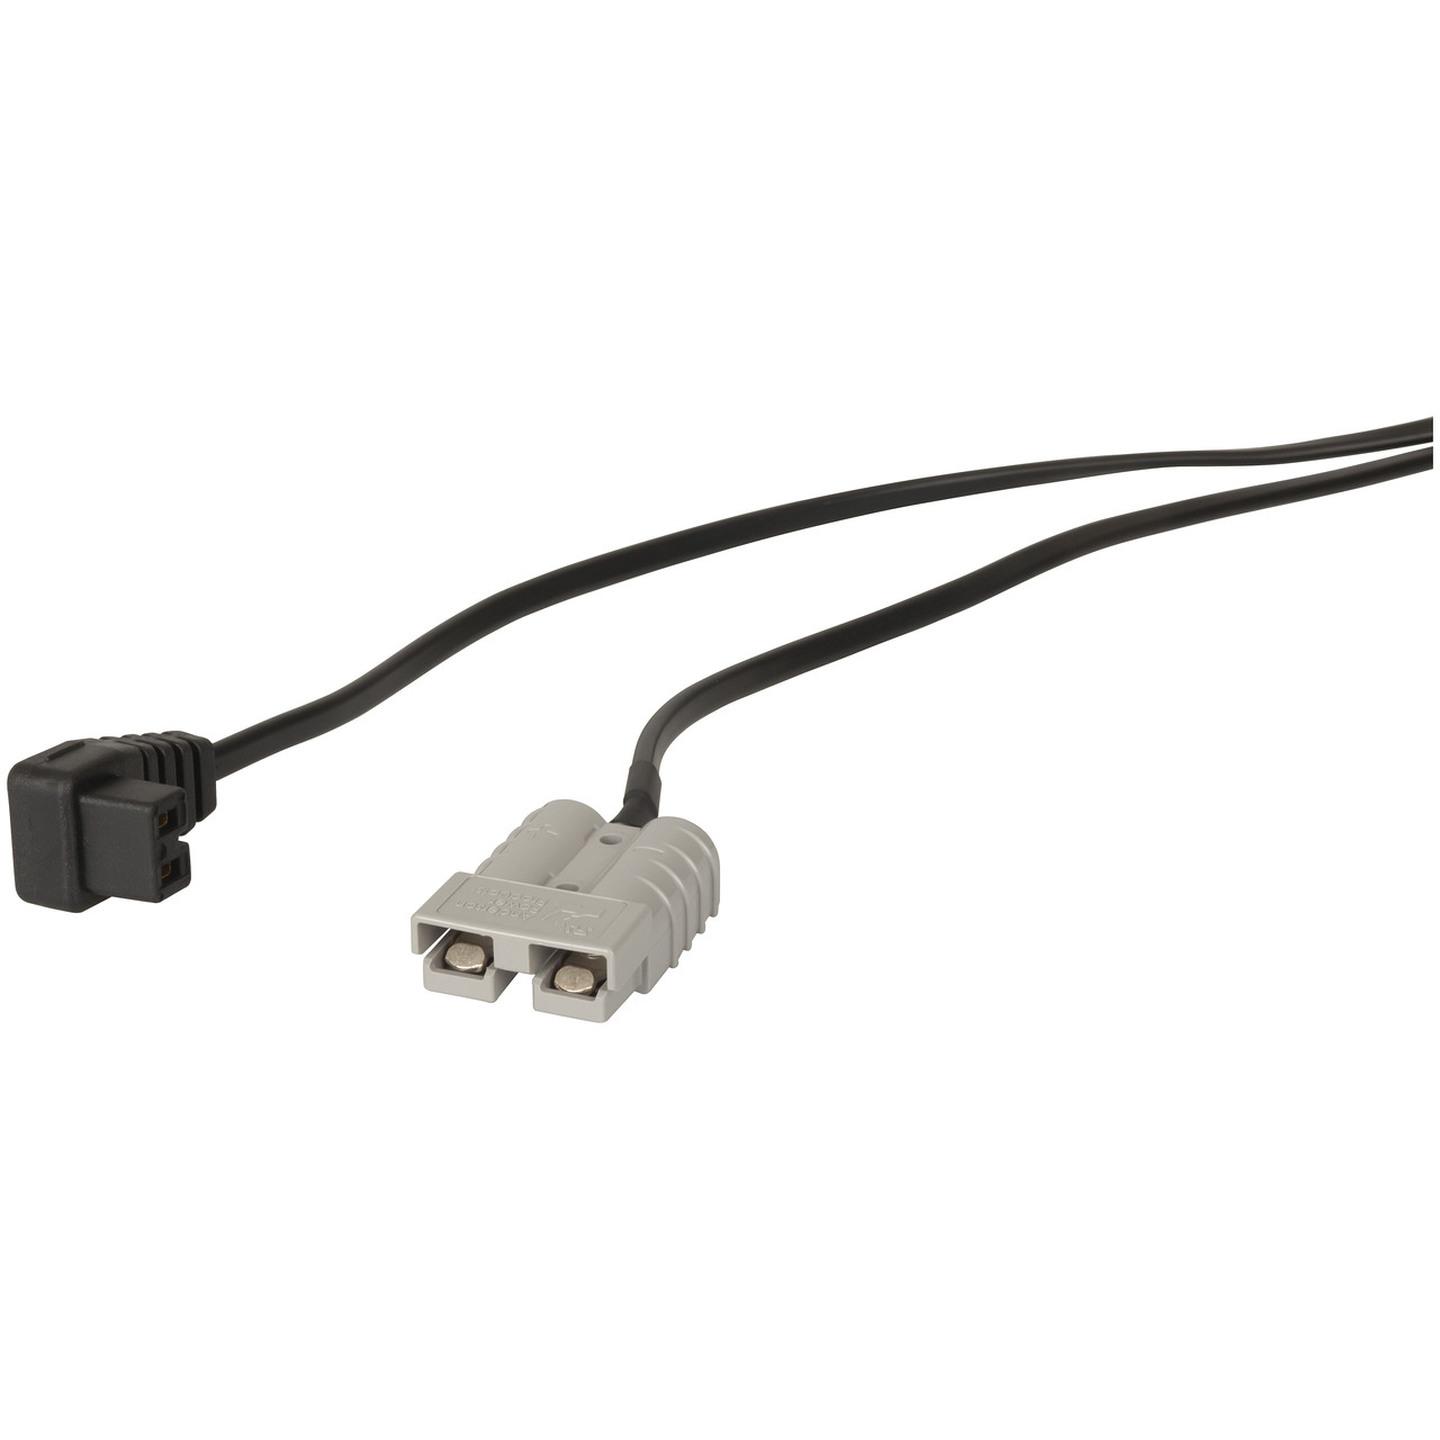 12/24V Anderson Power Cable for Brass Monkey and Waeco Fridges